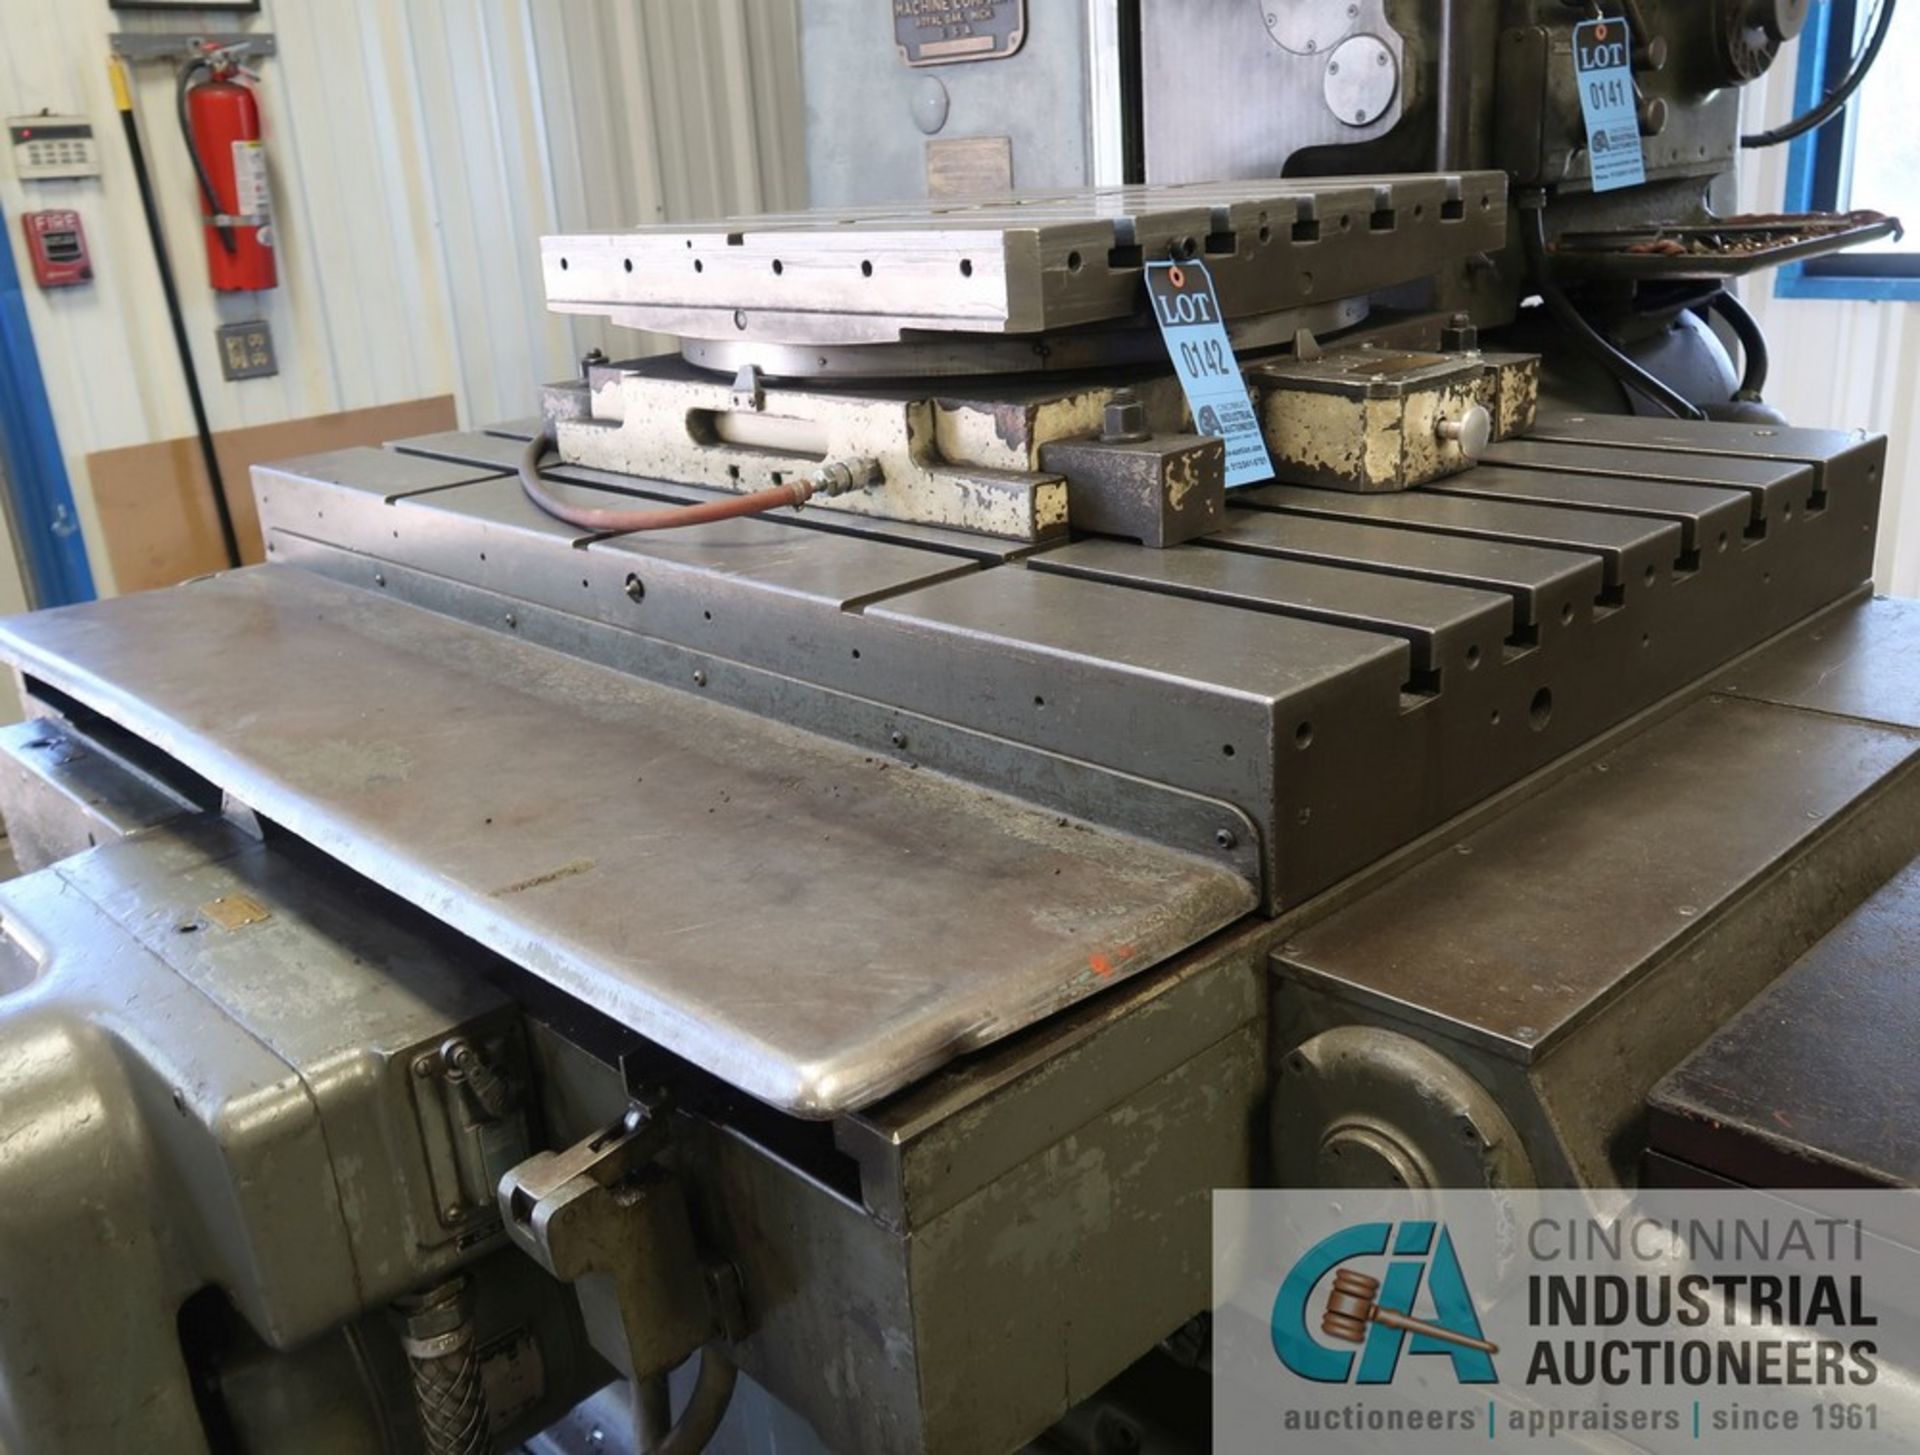 DEVLIEG MODEL 3B-48 SPIRALMATIC JIG MILL; S/N 1-255, 30" X 48" TABLE, 25-1,200 SPINDLE RPM, EASSON - Image 3 of 13